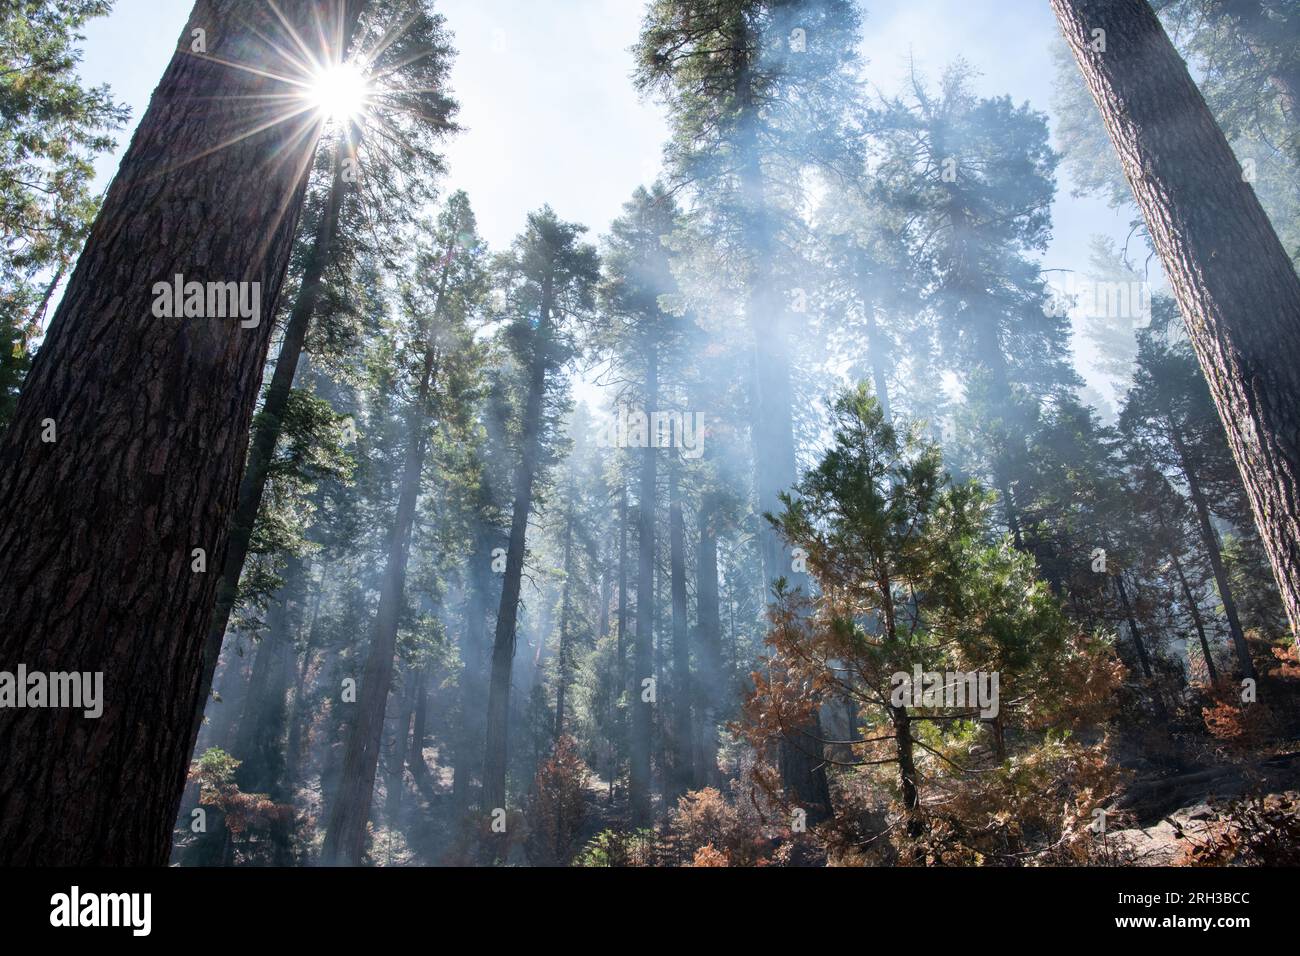 Stanislaus National Forest in the Sierra Nevada of California right after a forest fire burned through leaving behind smoke and charred trees. Stock Photo